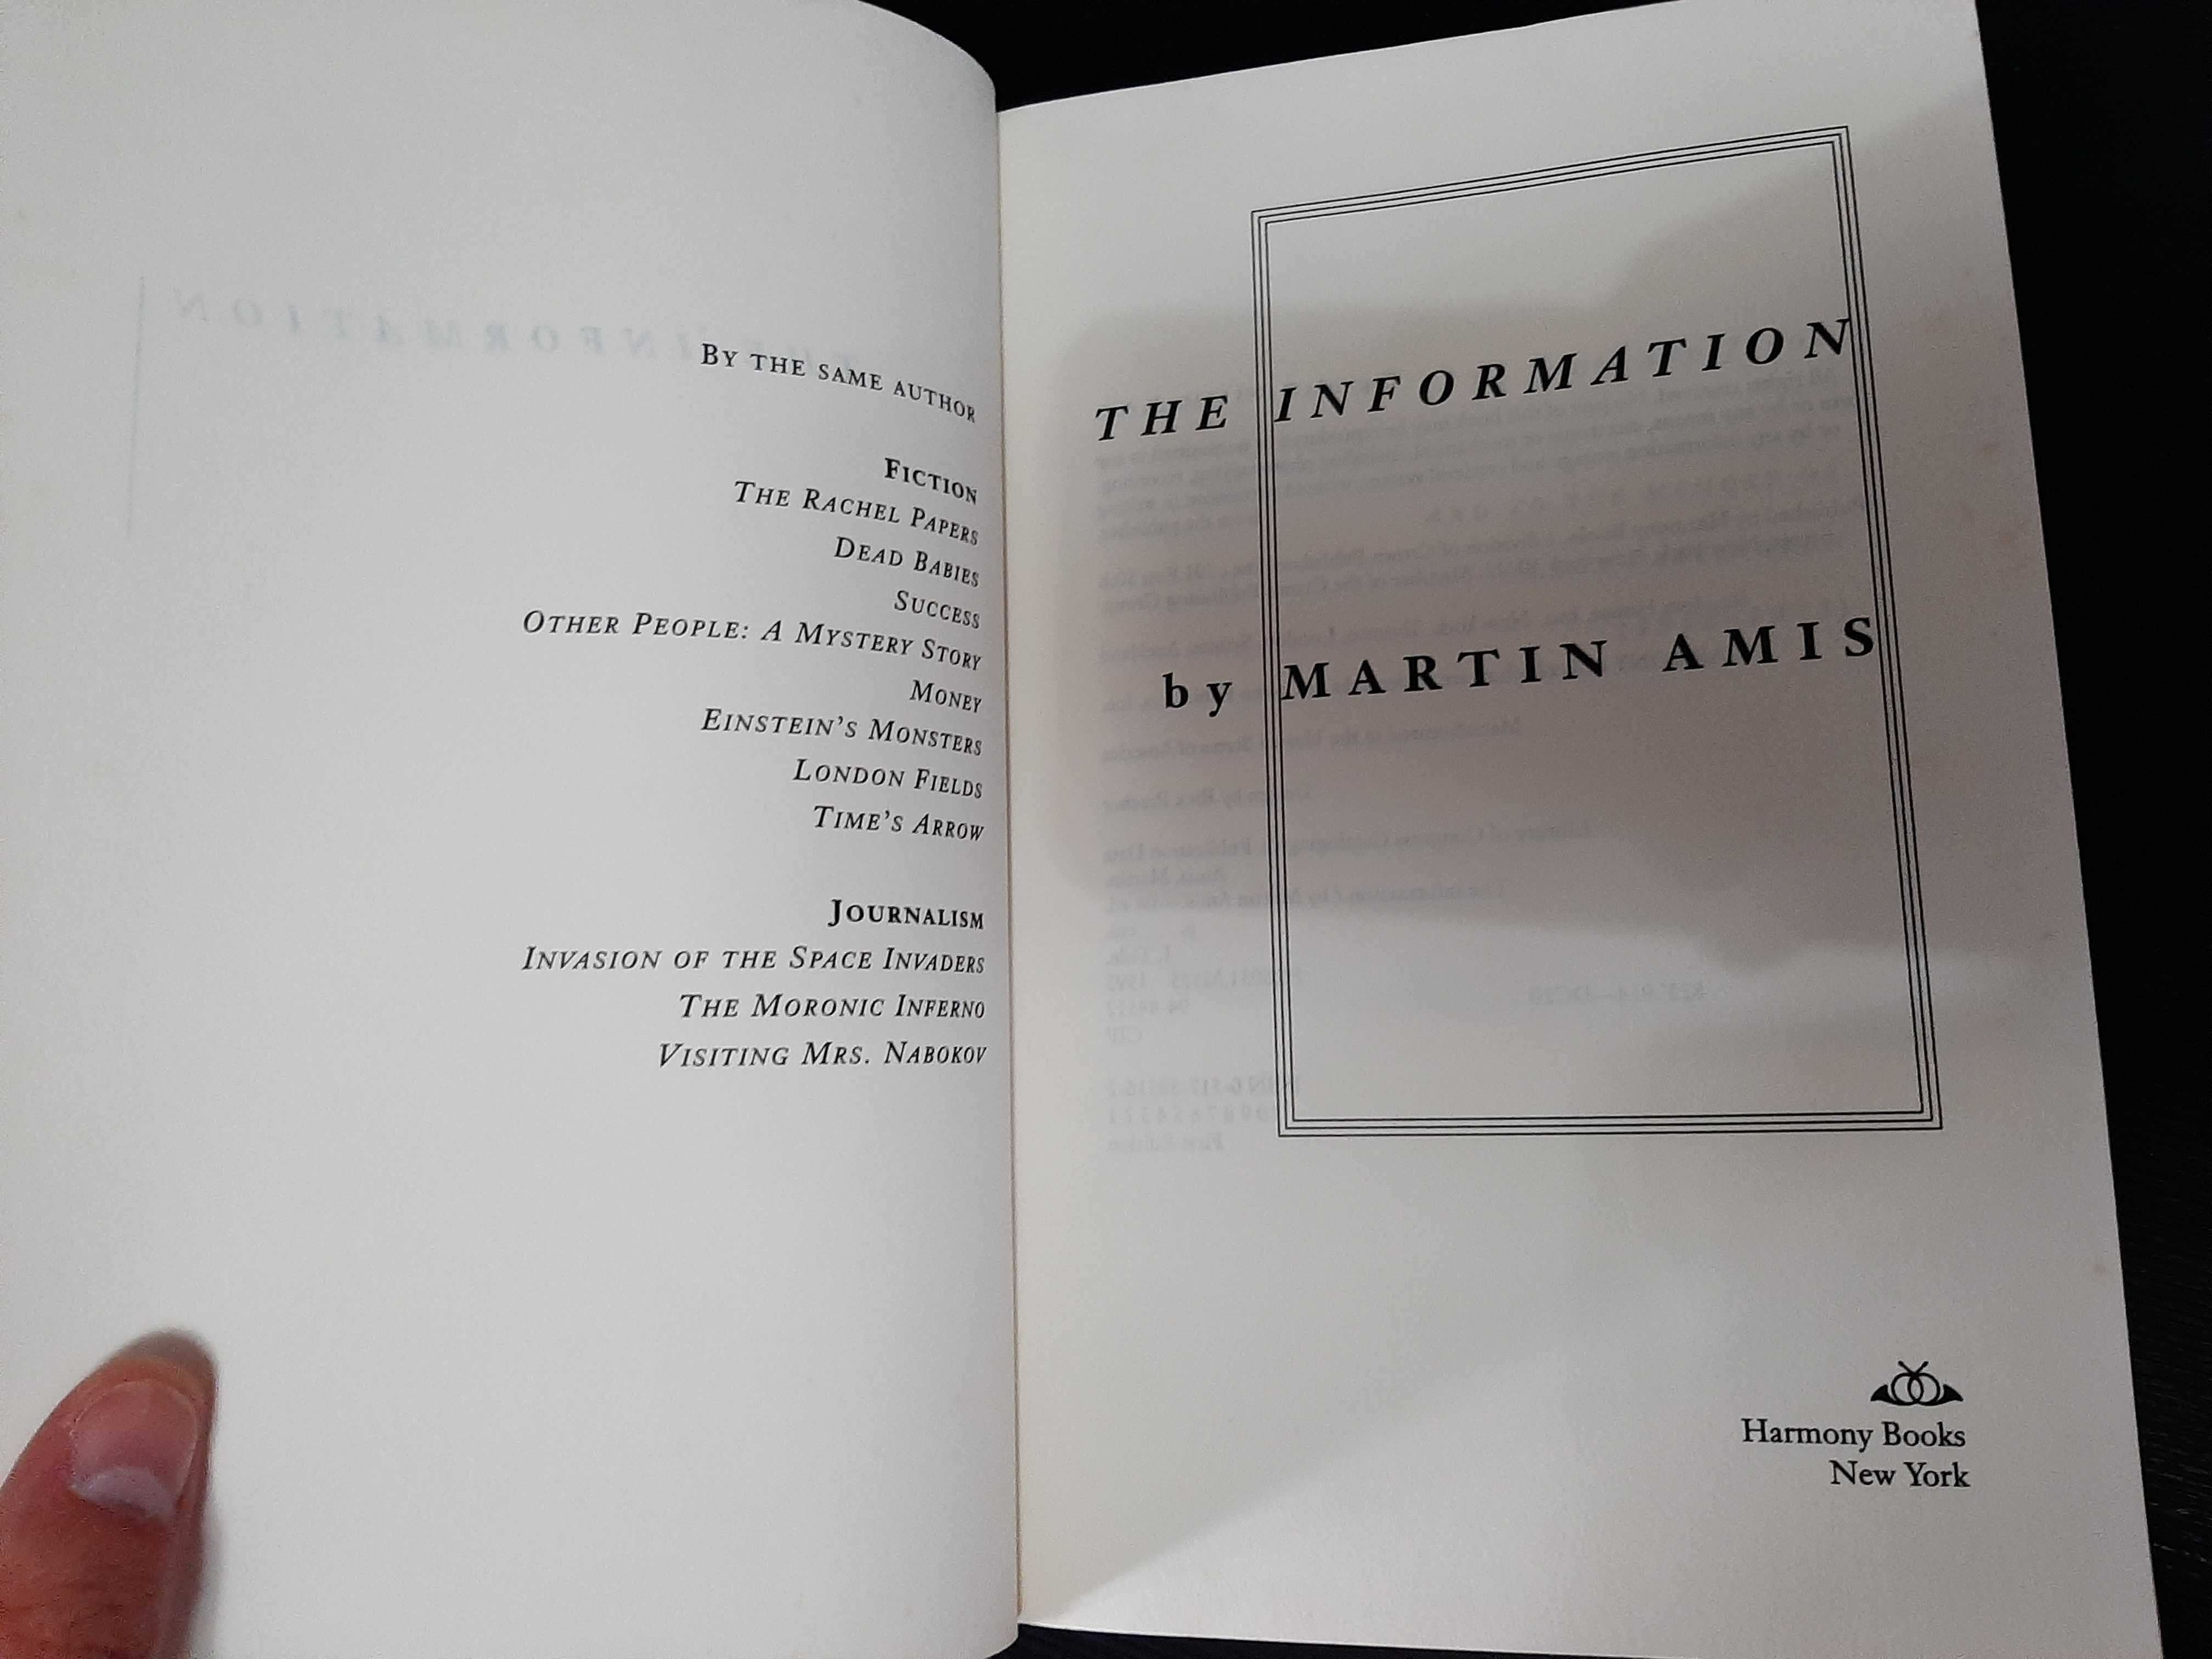 Martin Amis – The Information